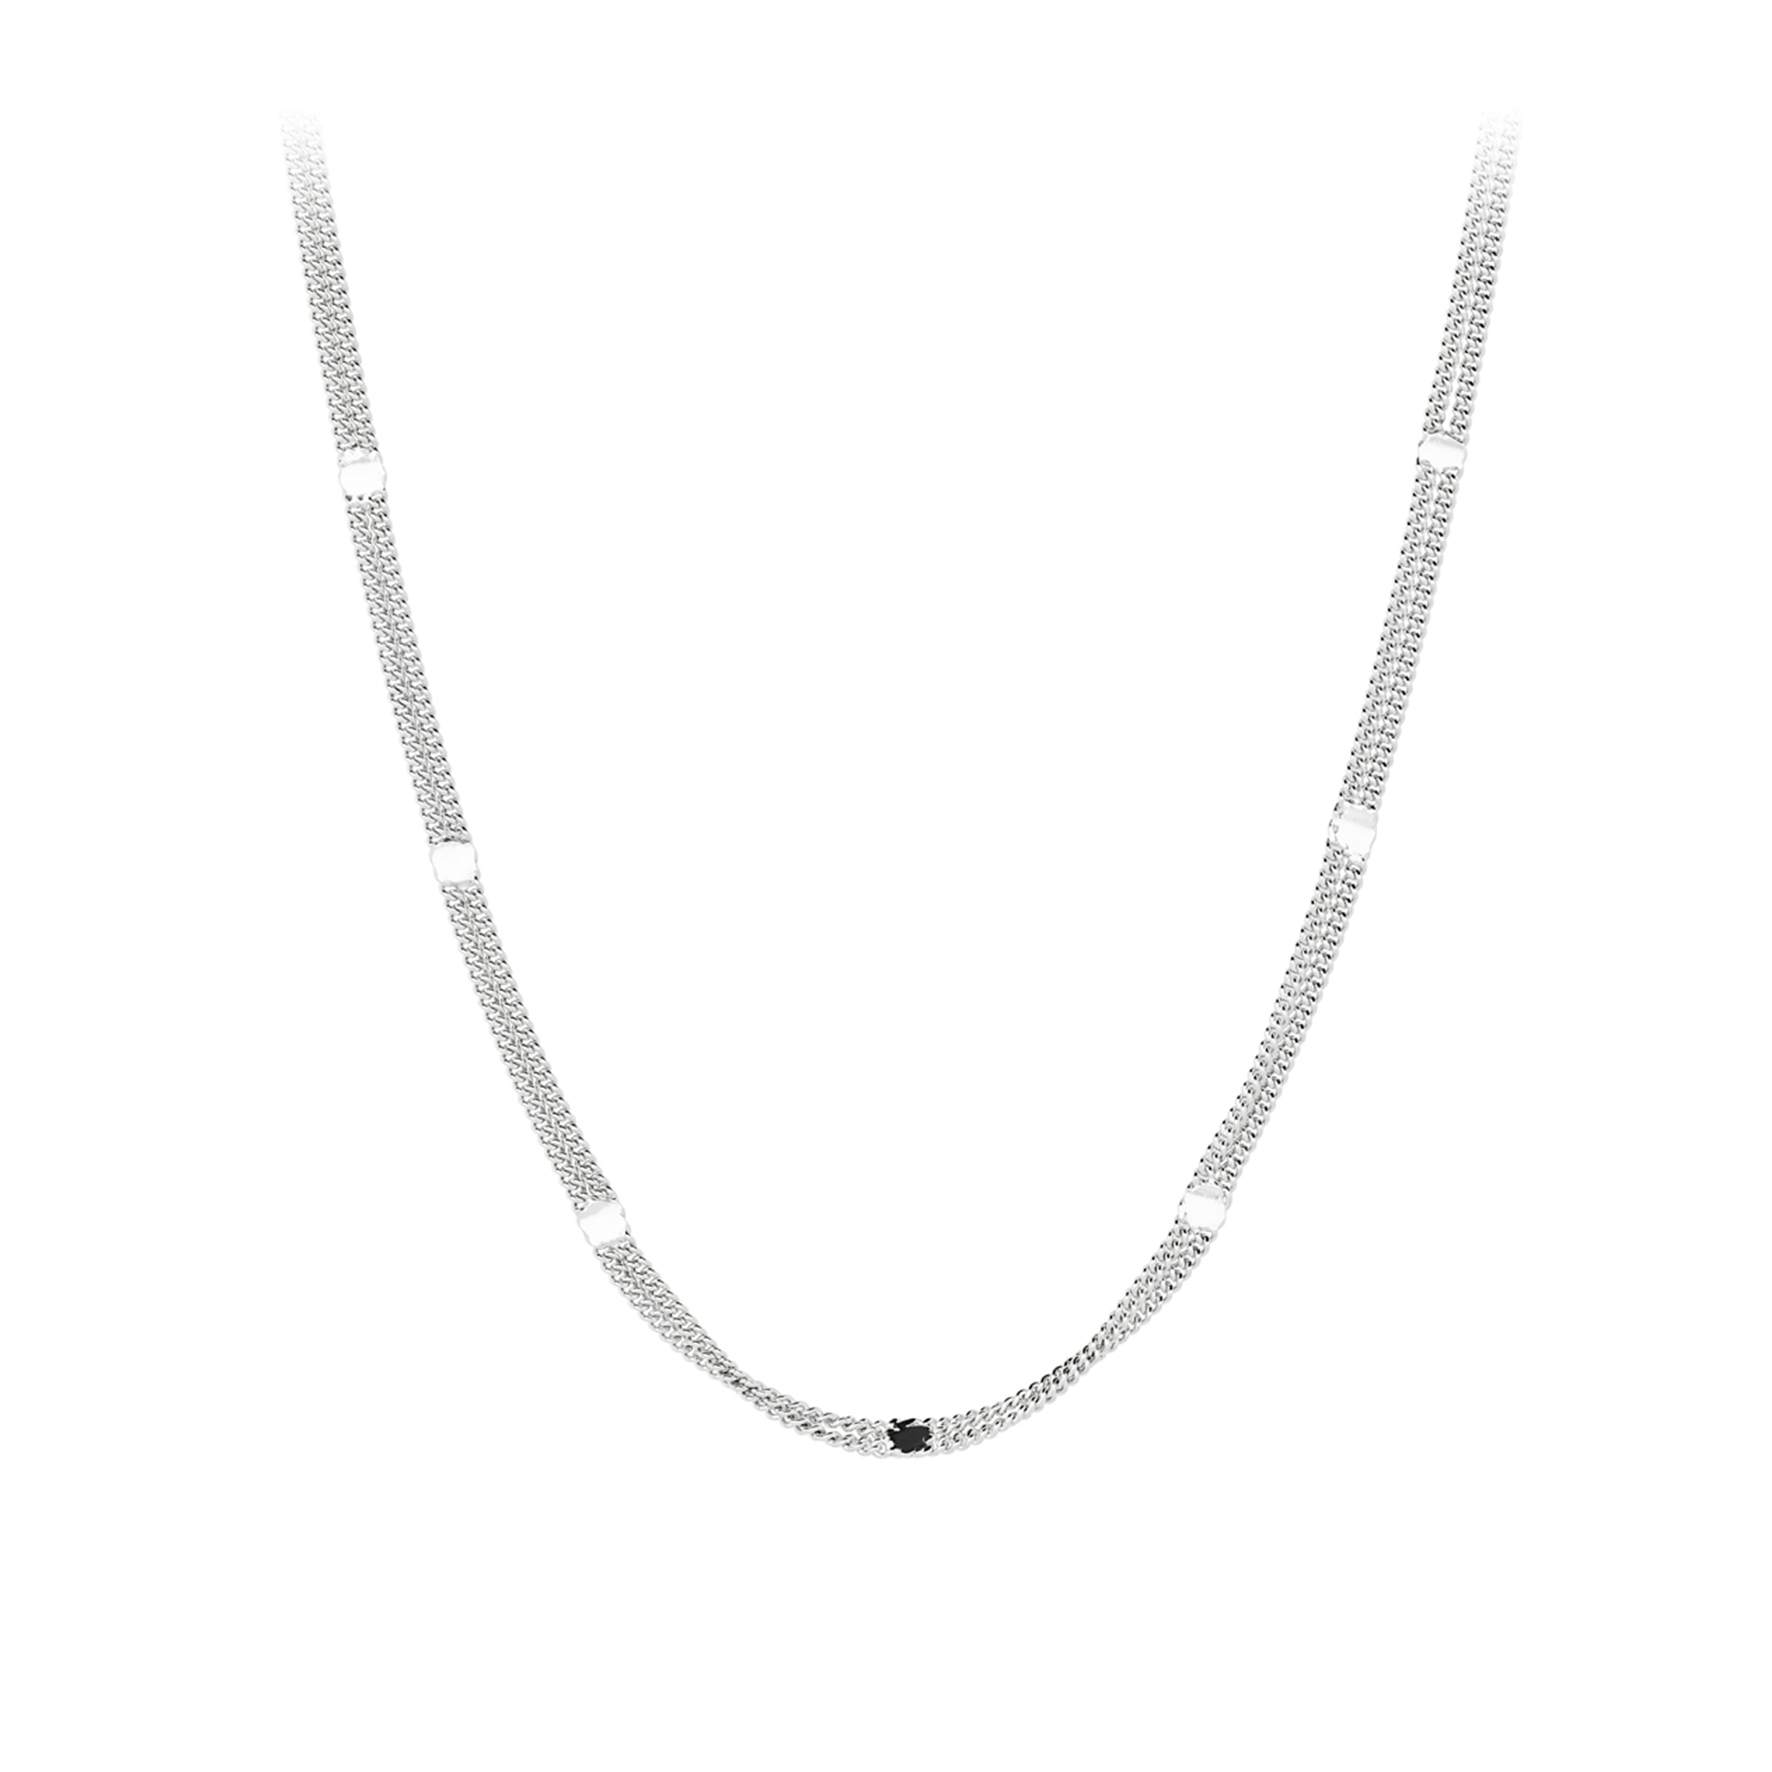 Agnes Necklace von Pernille Corydon in Silber Sterling 925